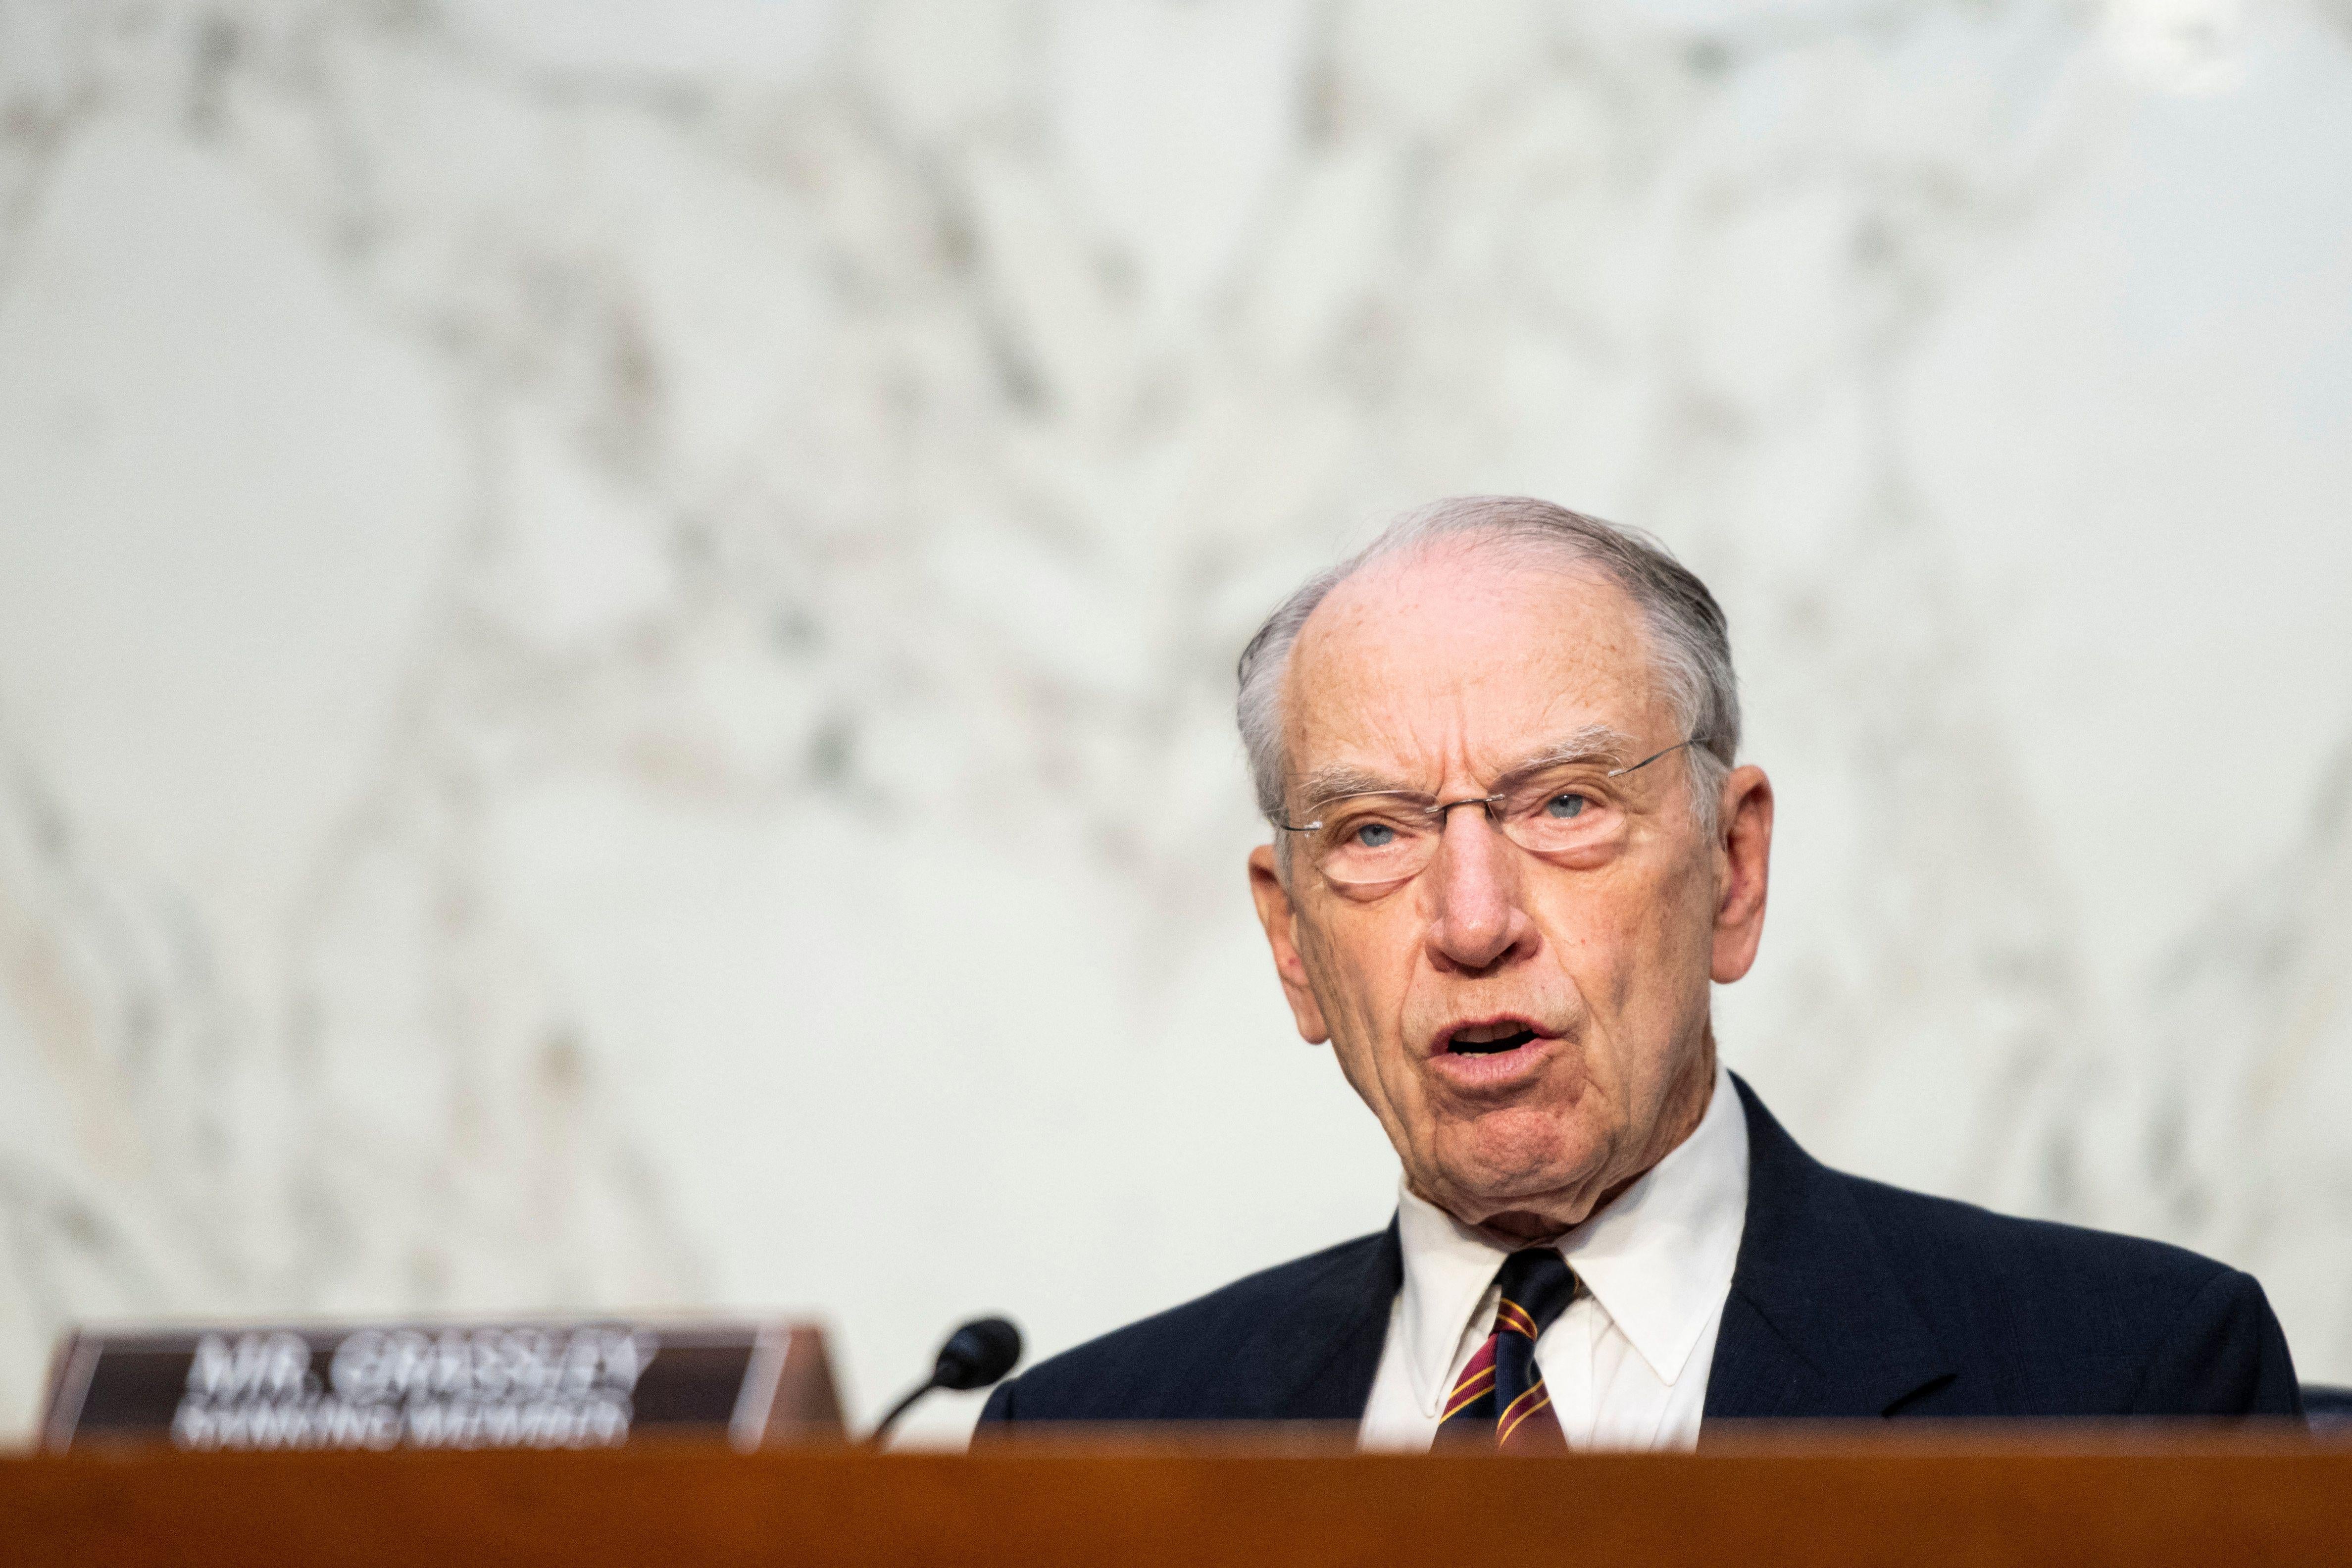 Grassley speaks into a microphone at a hearing.